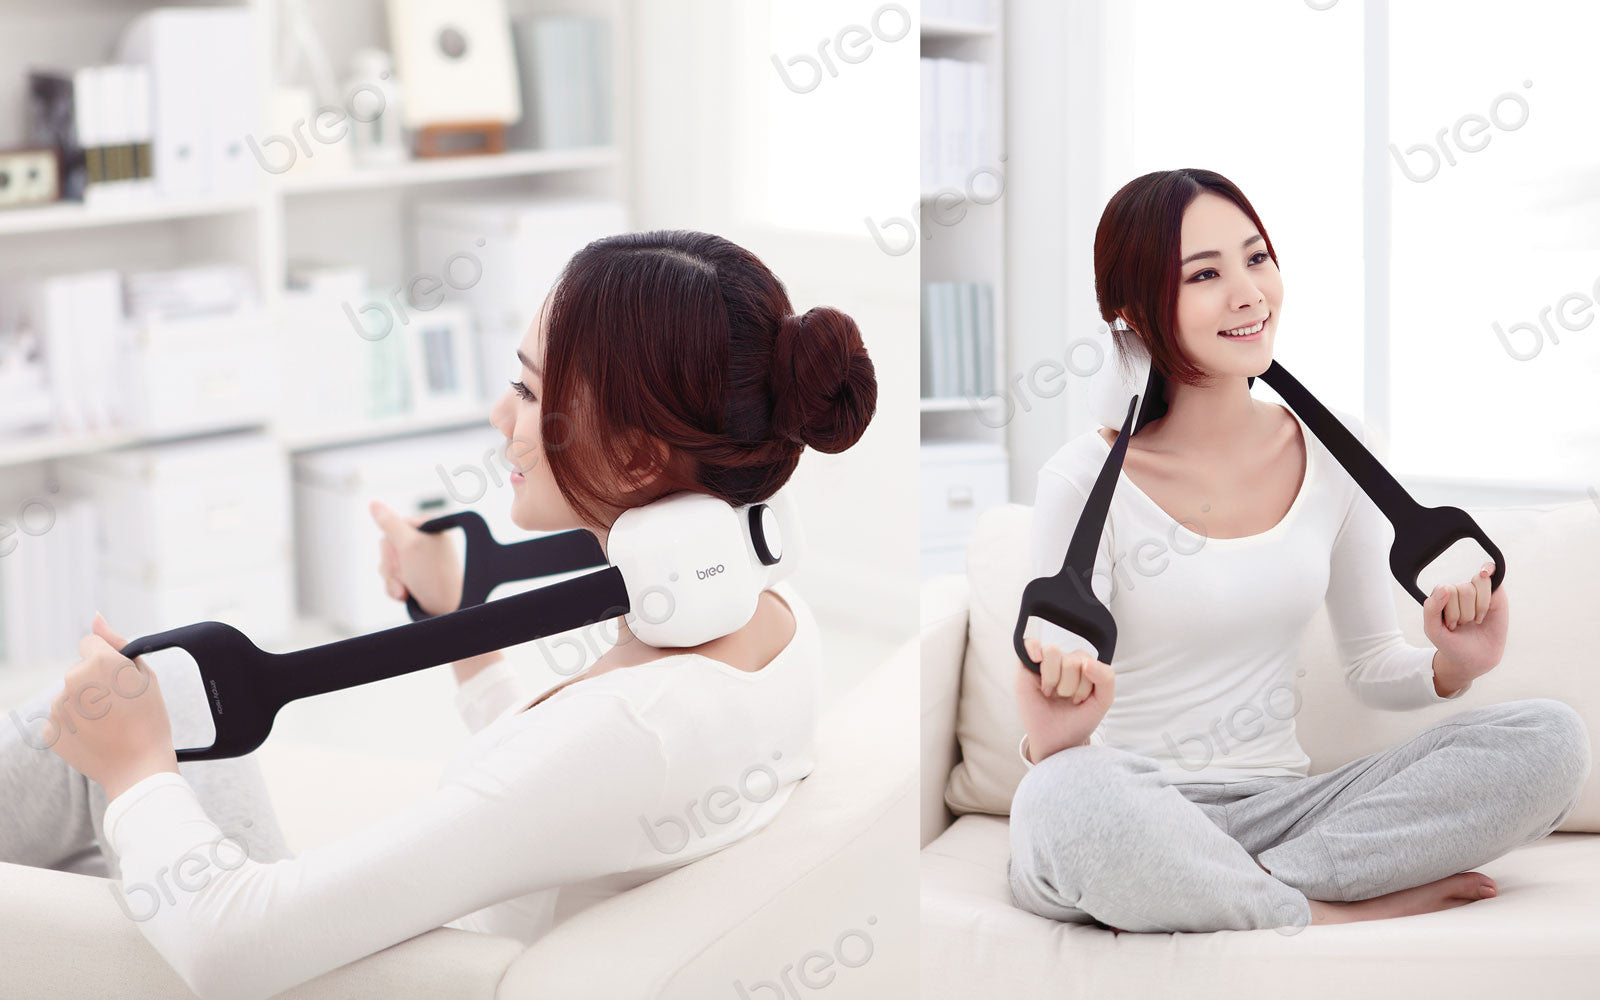 Breo neck massager - ineck 3, offers you the best neck massage with a hands- free design, three intensity modes and full-covera…